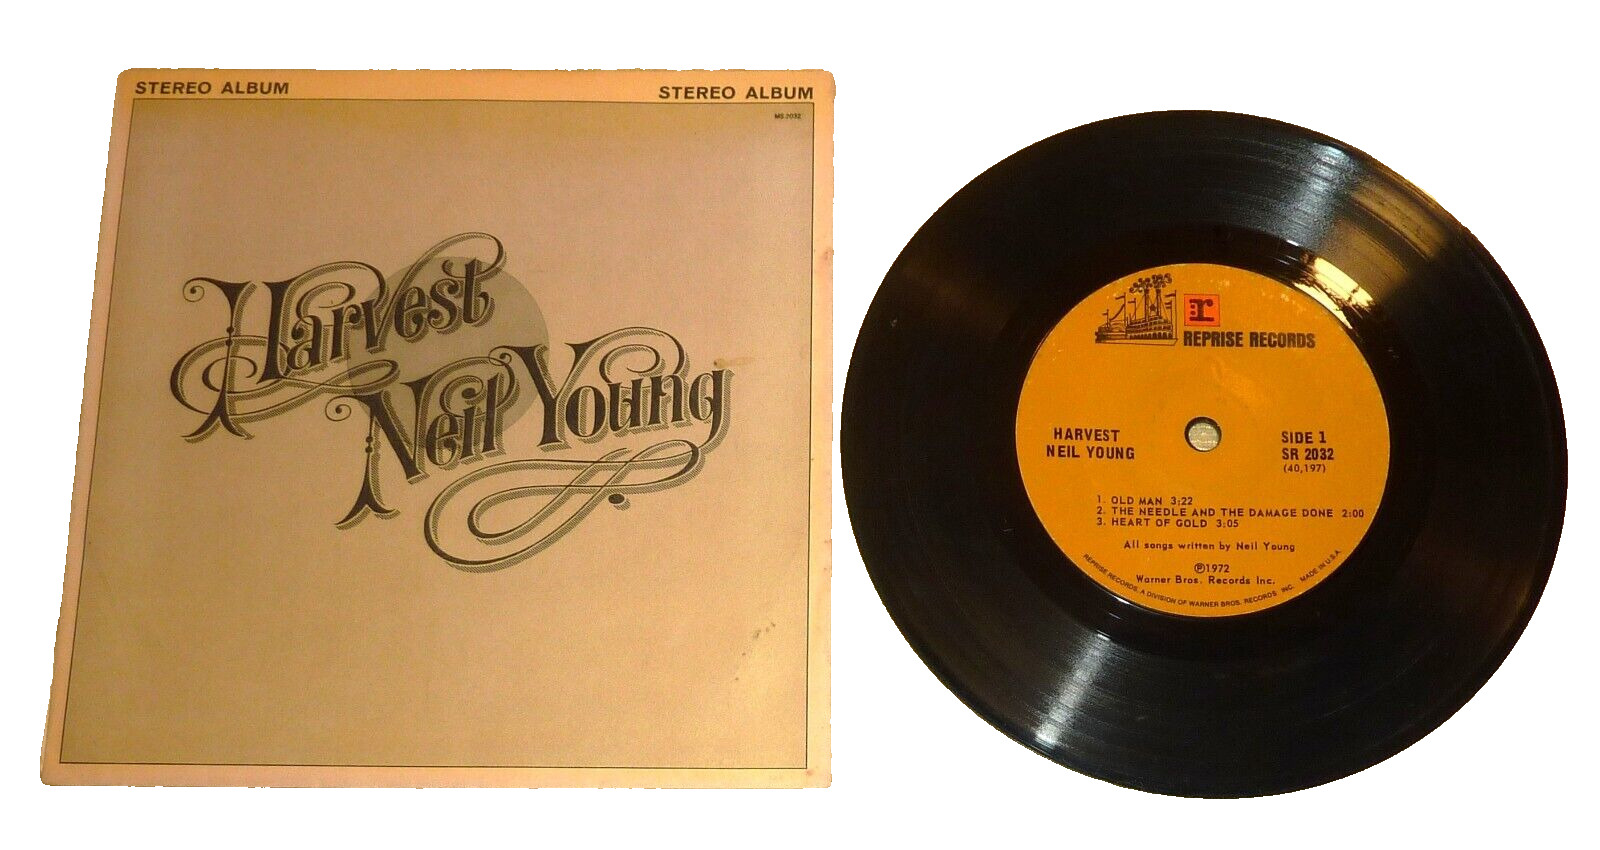 7” 33 1/3 RPM JUKE BOX RECORD by NEIL YOUNG \